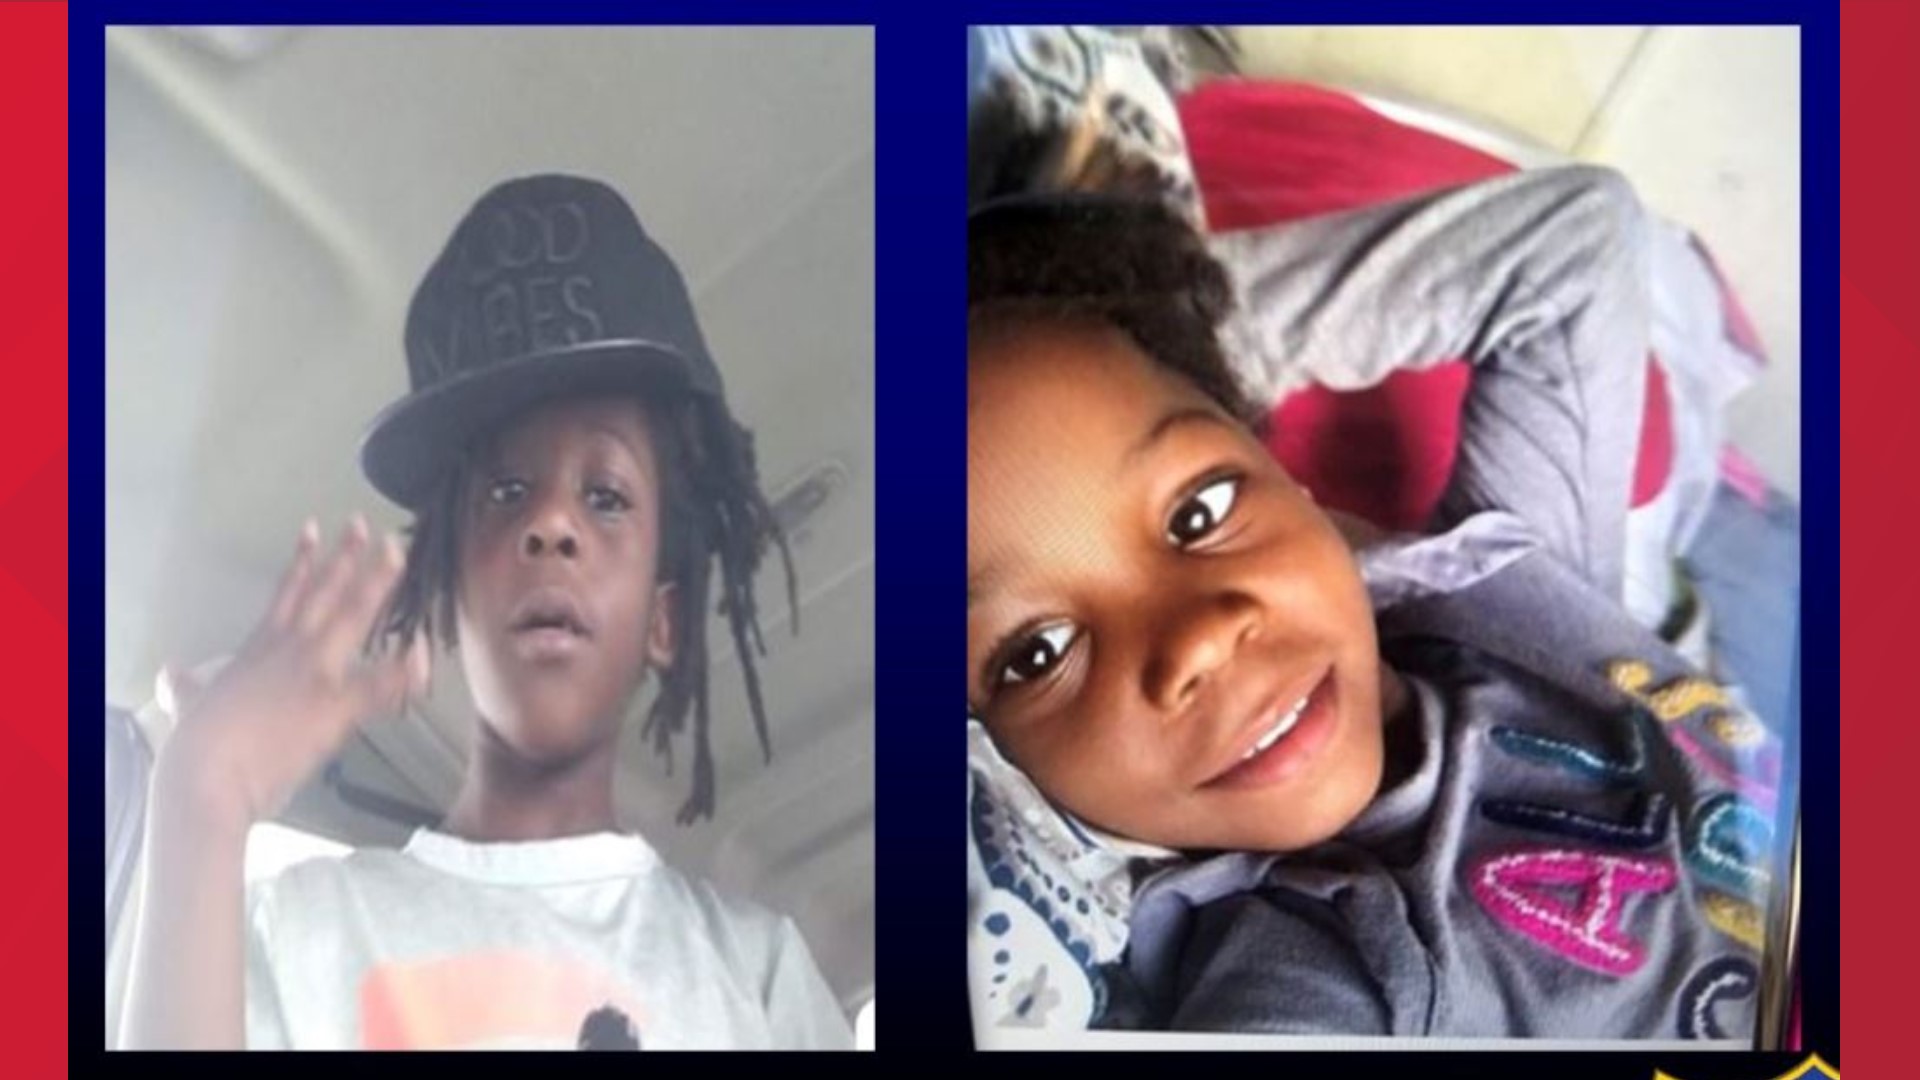 Six-year-old Braxton Williams and 5-year-old Bri'ya Williams were last seen in the 10200 block of West Beaver Street at around 11:30 a.m., according to police.